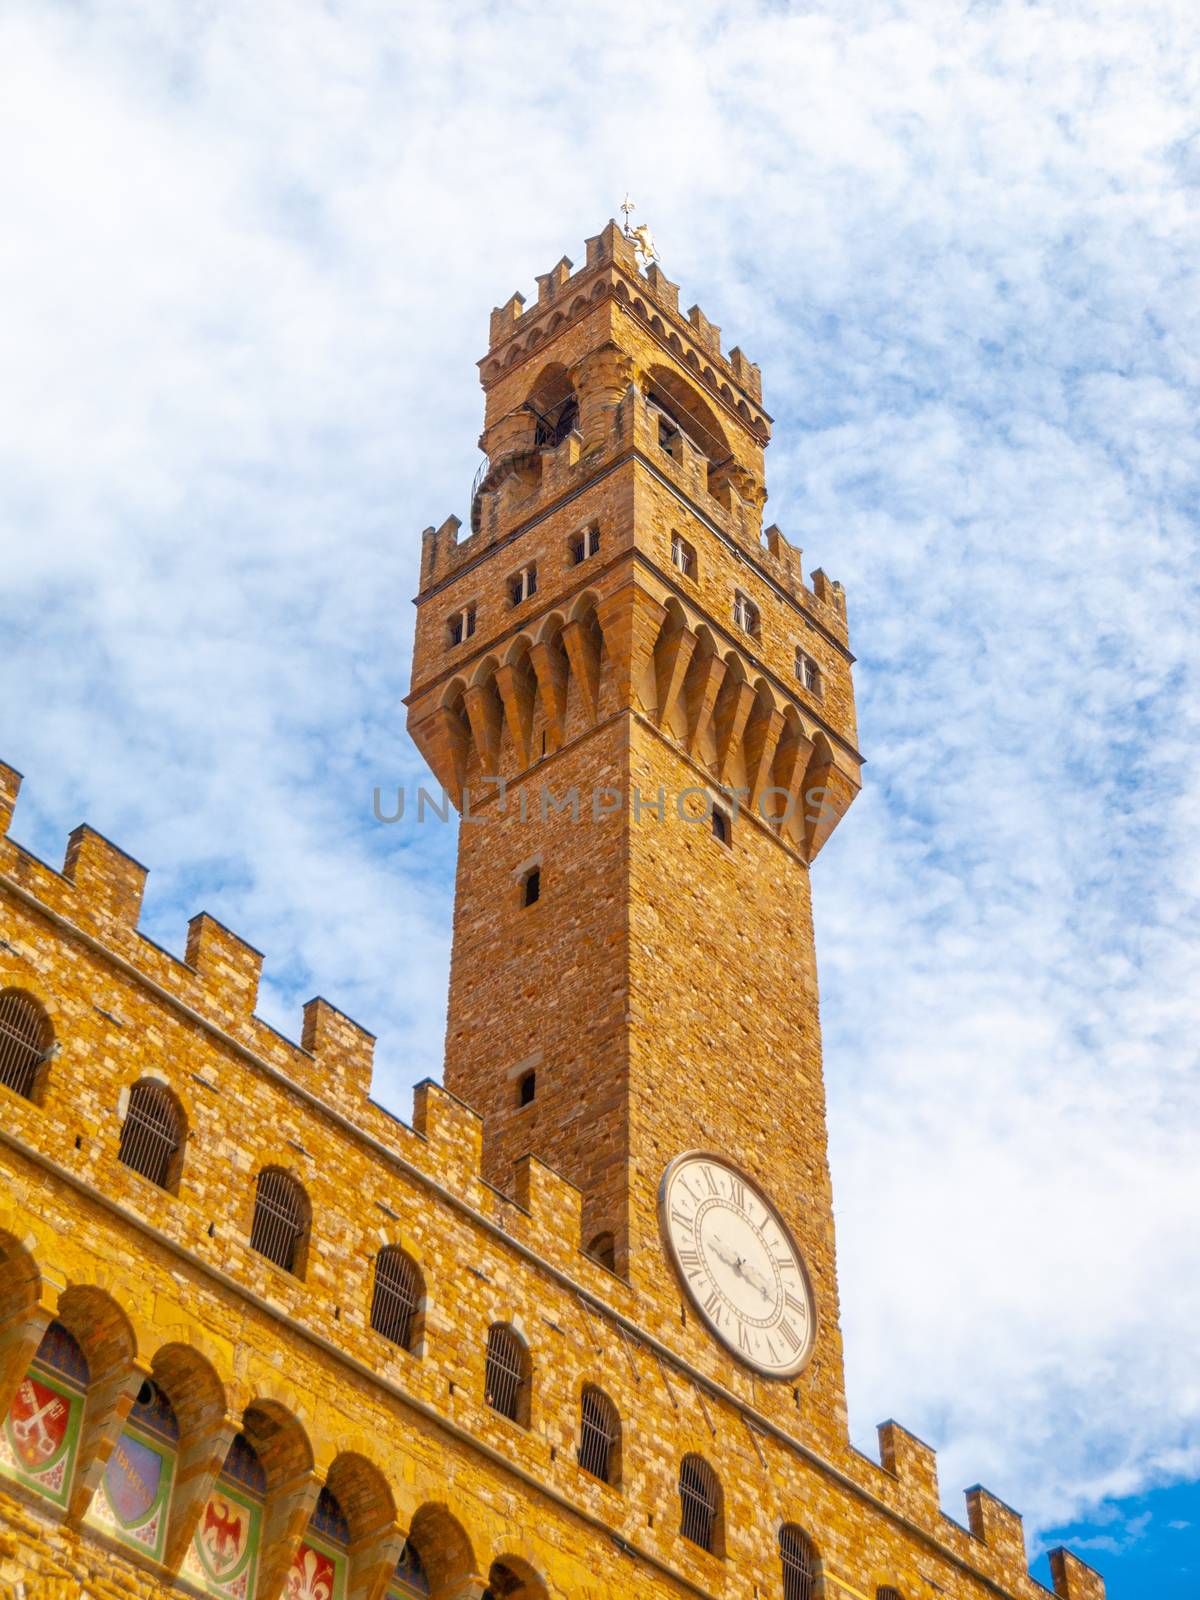 Bottom view of Pallazo Vecchio, Old Palace - Town Hall, with high bell tower, Piazza della Signoria, Florence, Tuscany, Italy.